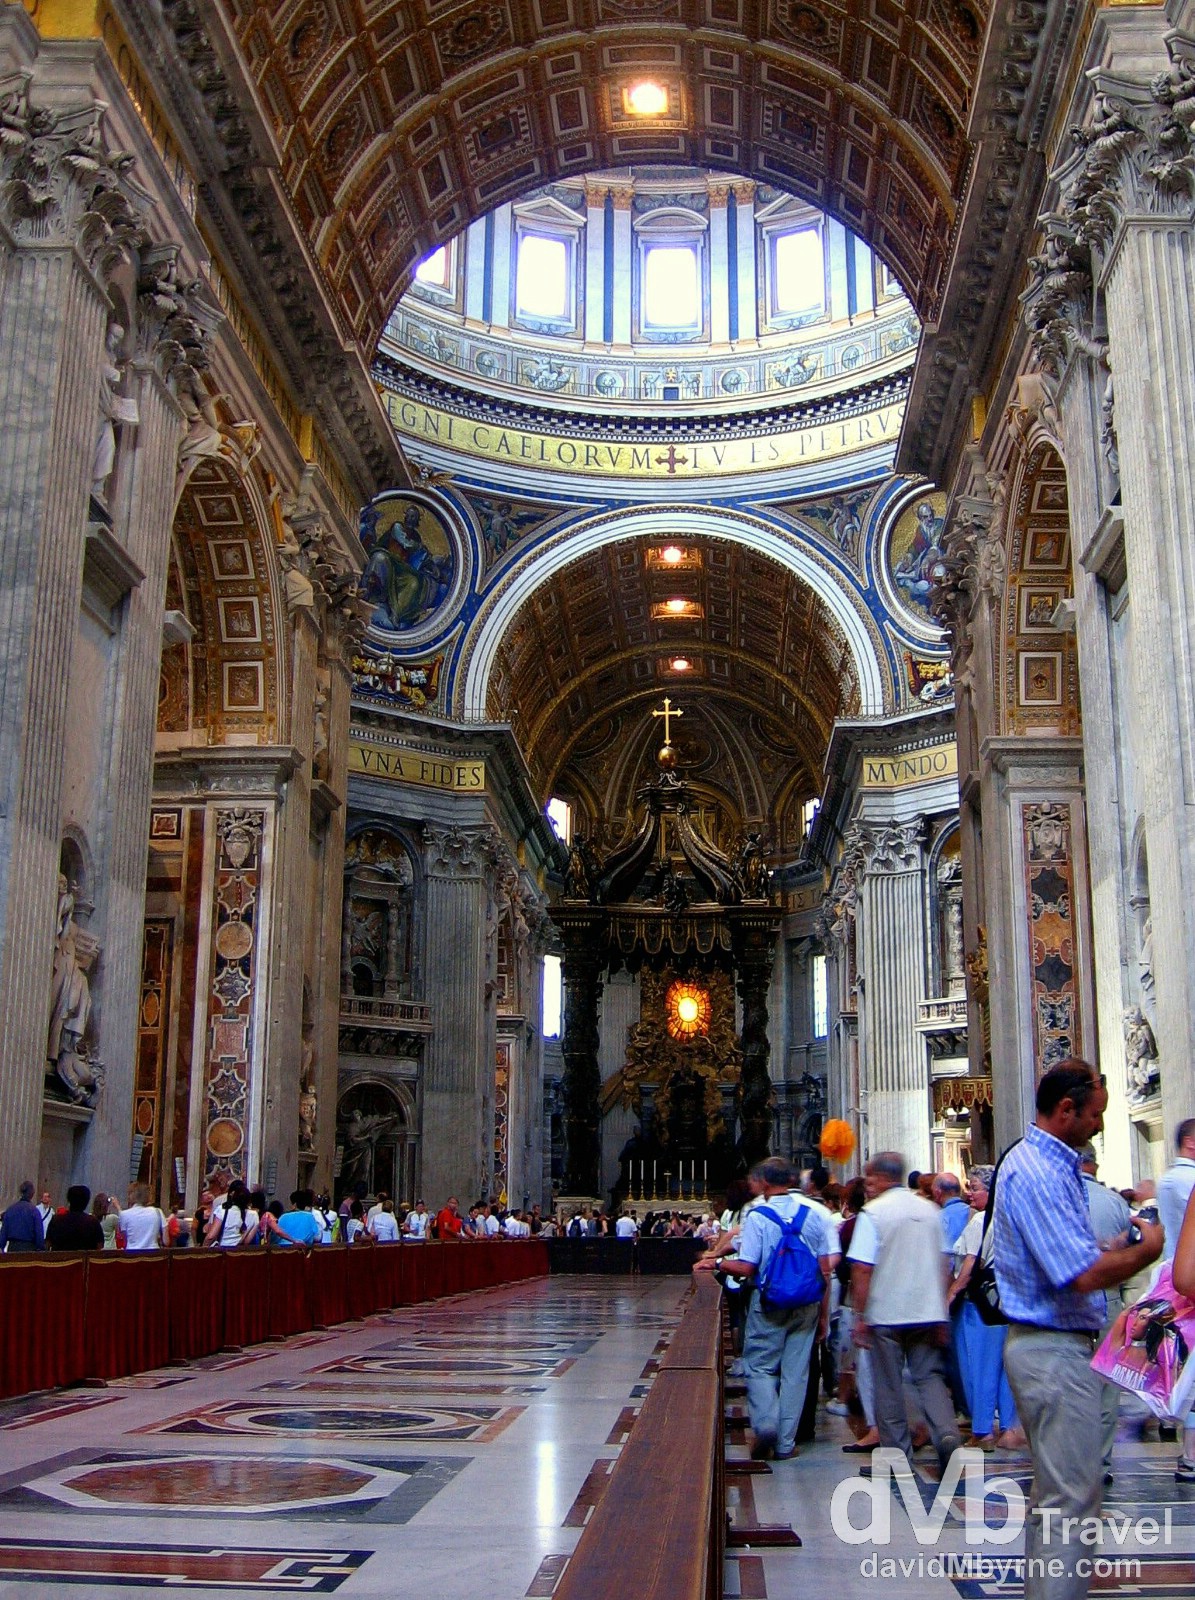 The interior of St. Peter's Basilica, Vatican City. September 3rd, 2007.